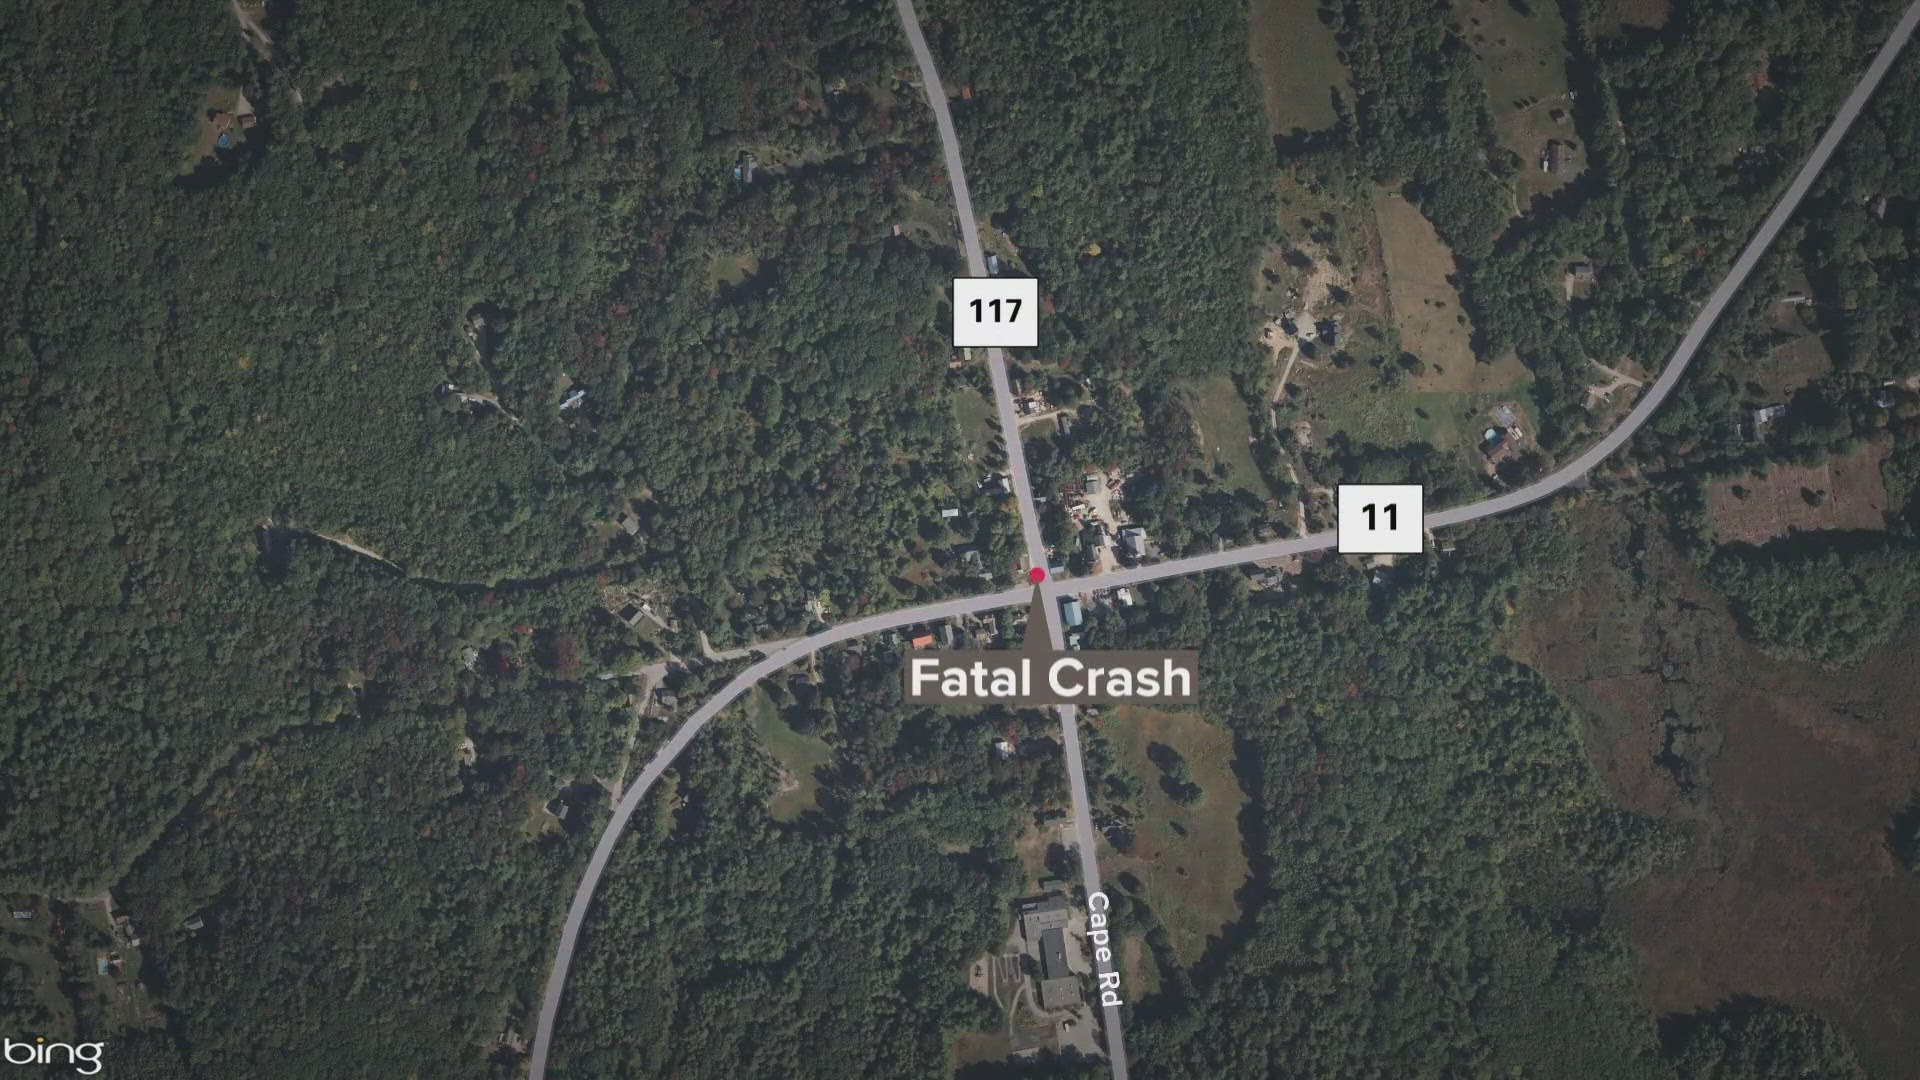 A passenger in one of the three vehicles involved in the crash was pronounced dead at the scene Saturday.